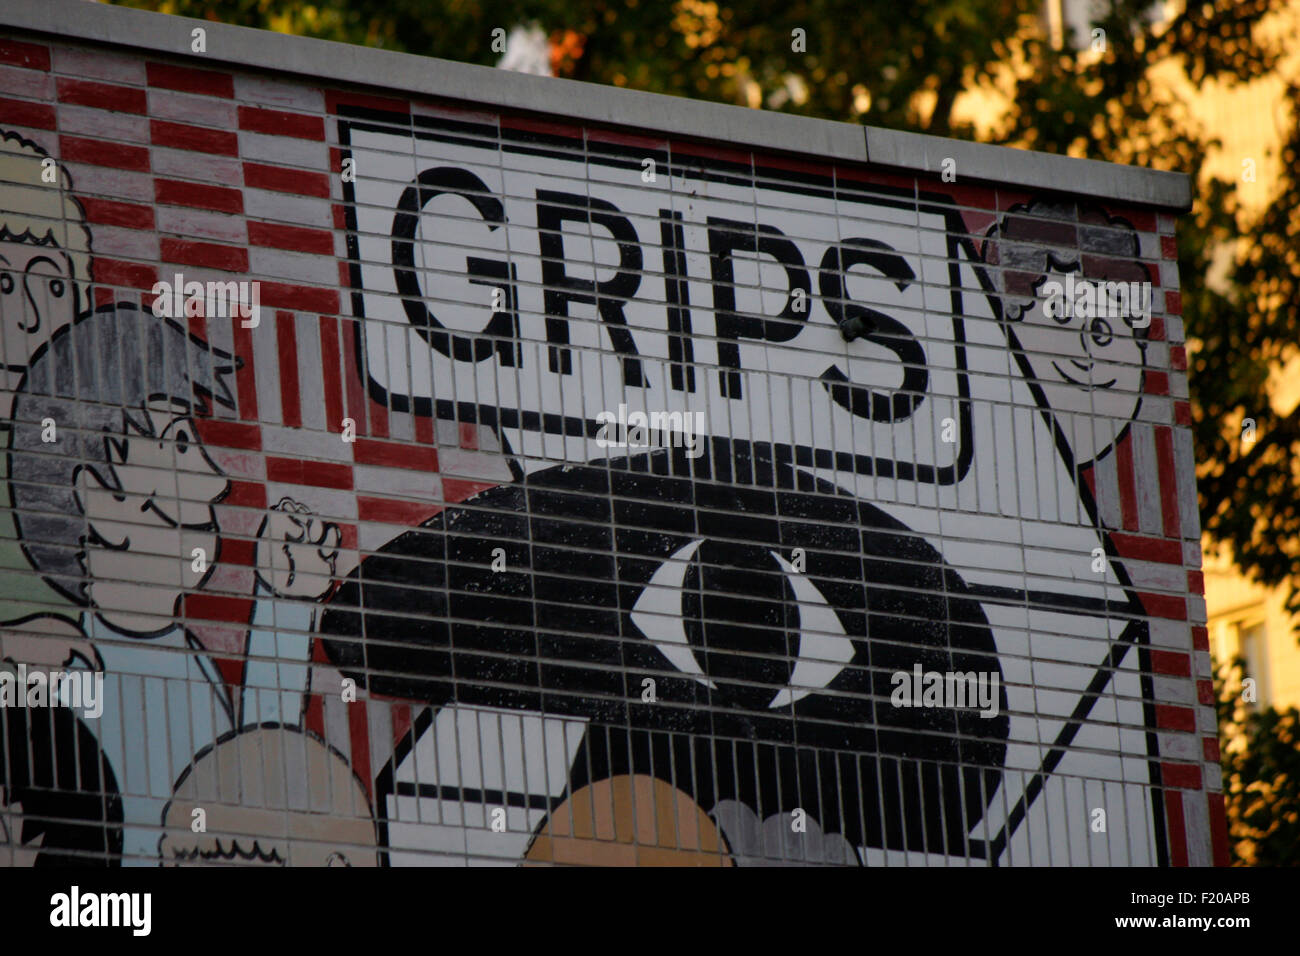 Markenname : 'GRIPS Theater", Berlin. Banque D'Images